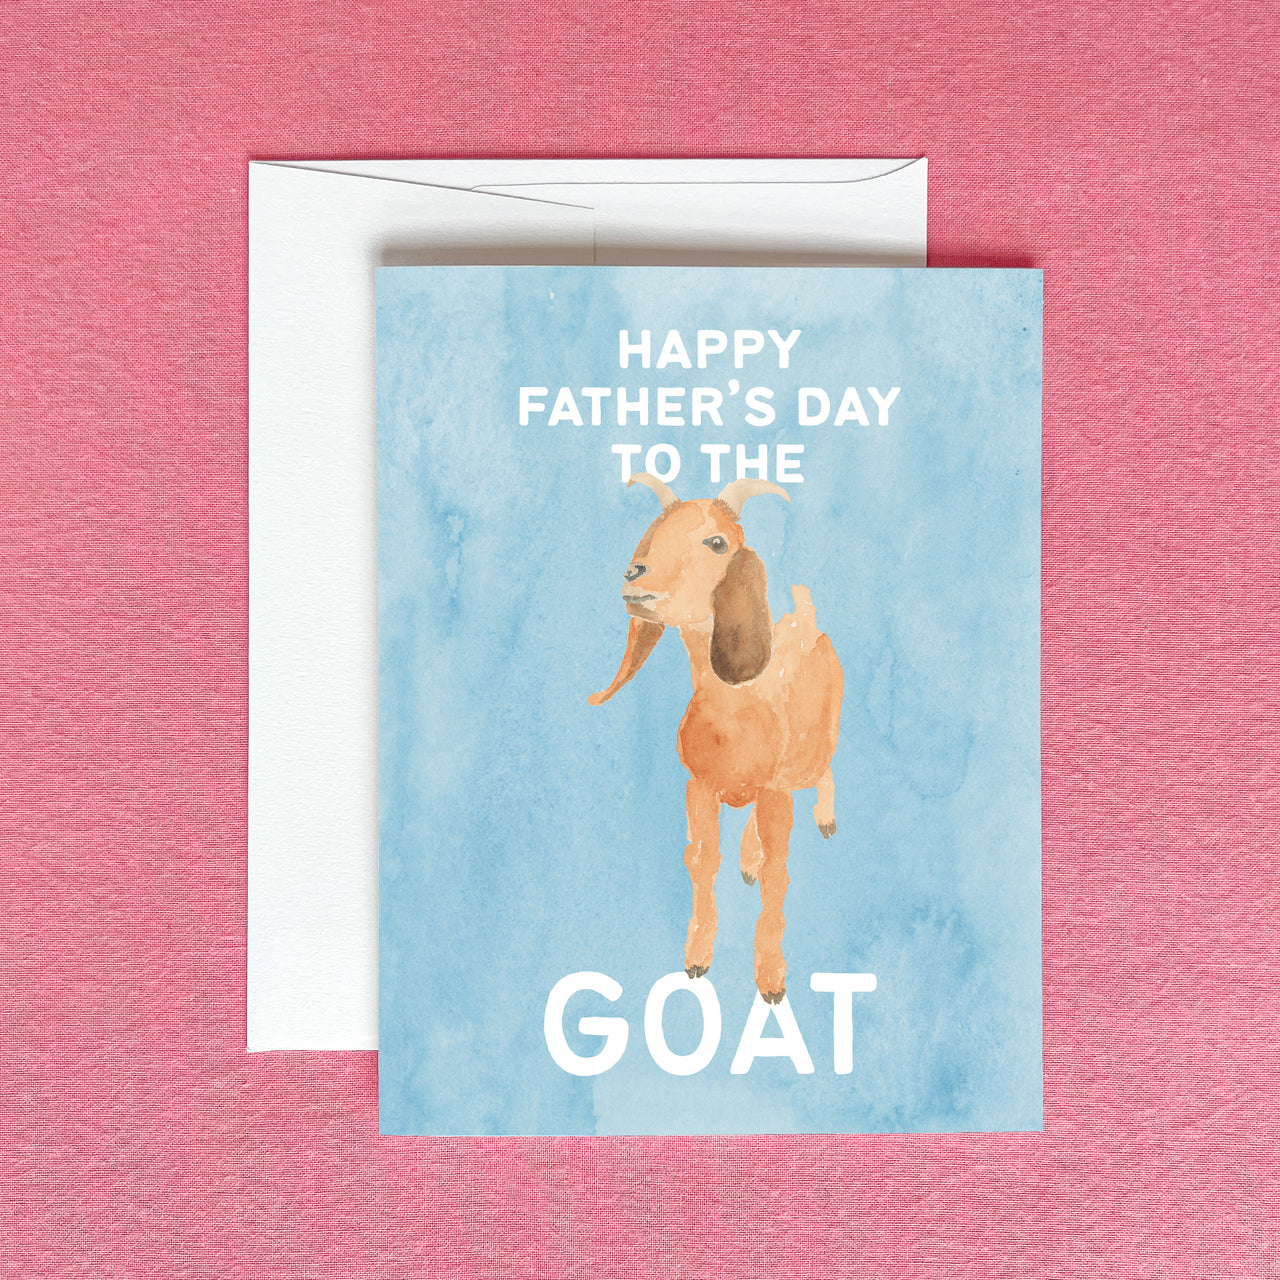 Happy Father's Day to the GOAT Greeting Card by Gert & Co